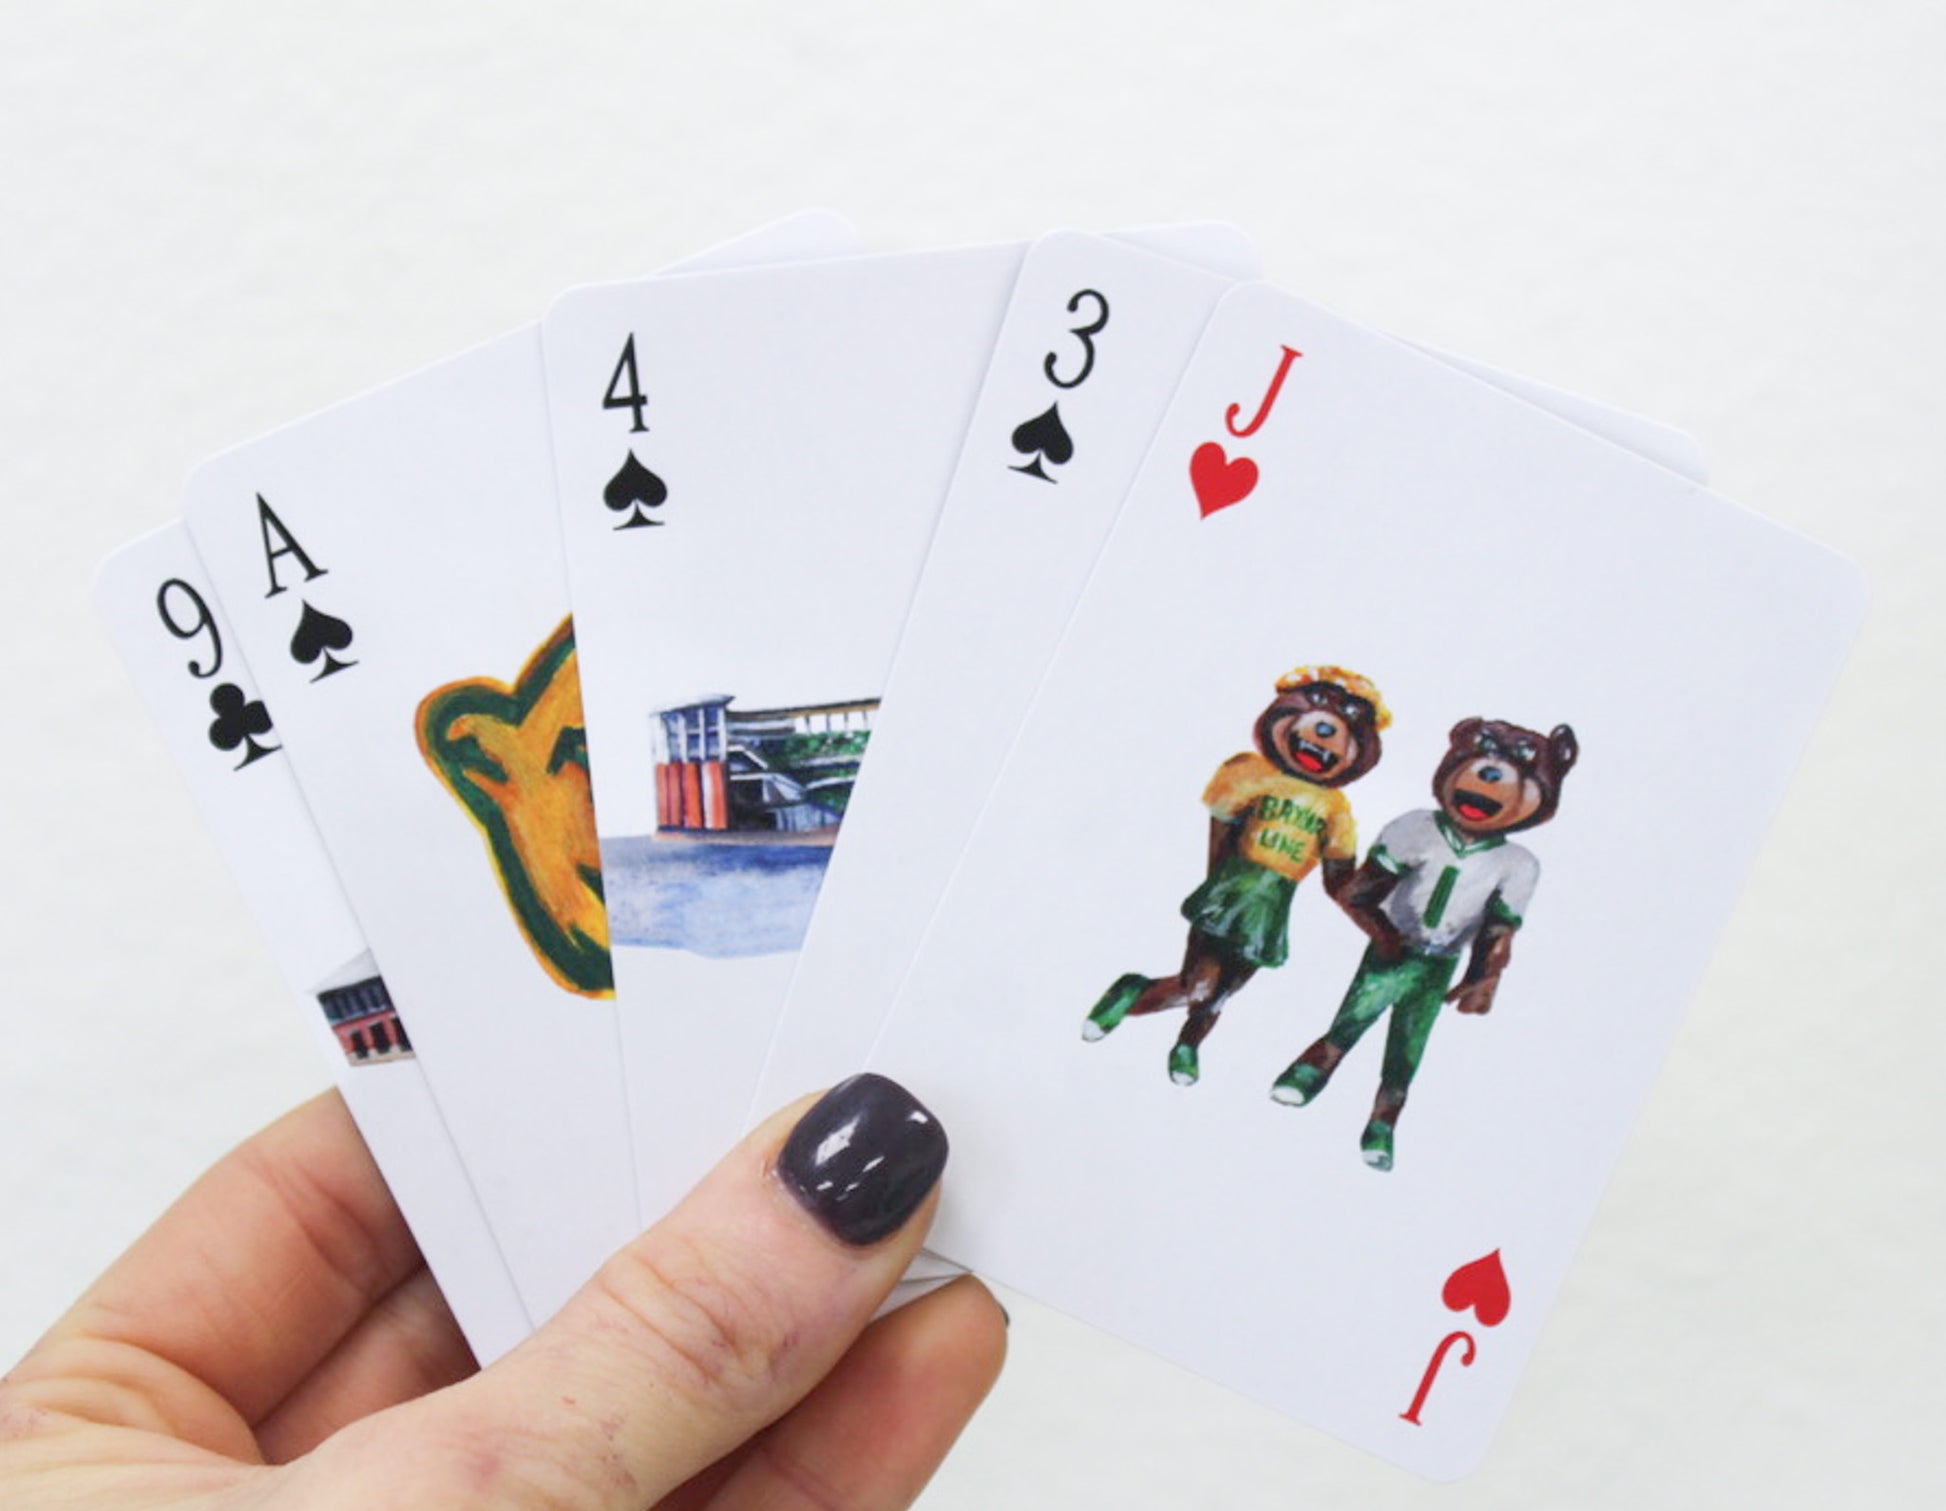 Baylor playing cards by FOSTER